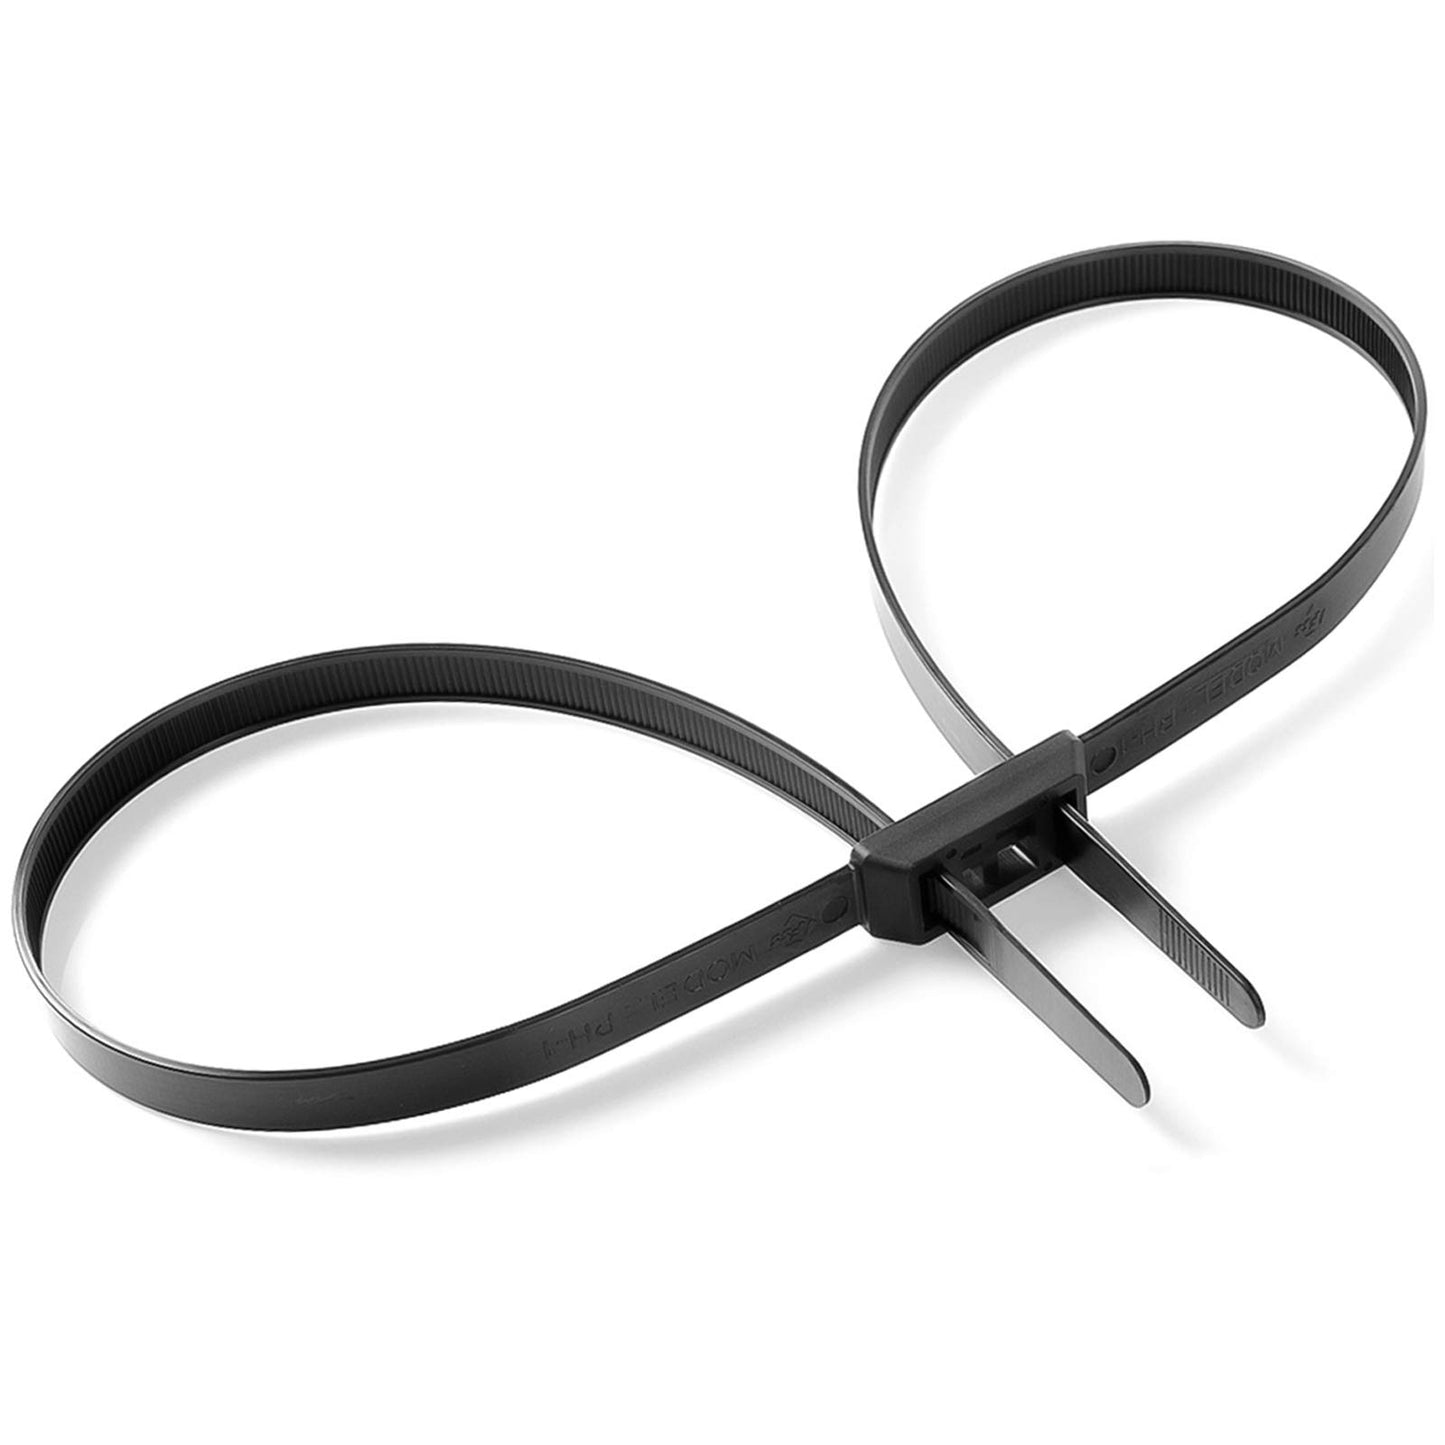 13 x 880mm Handcuff Cable Ties